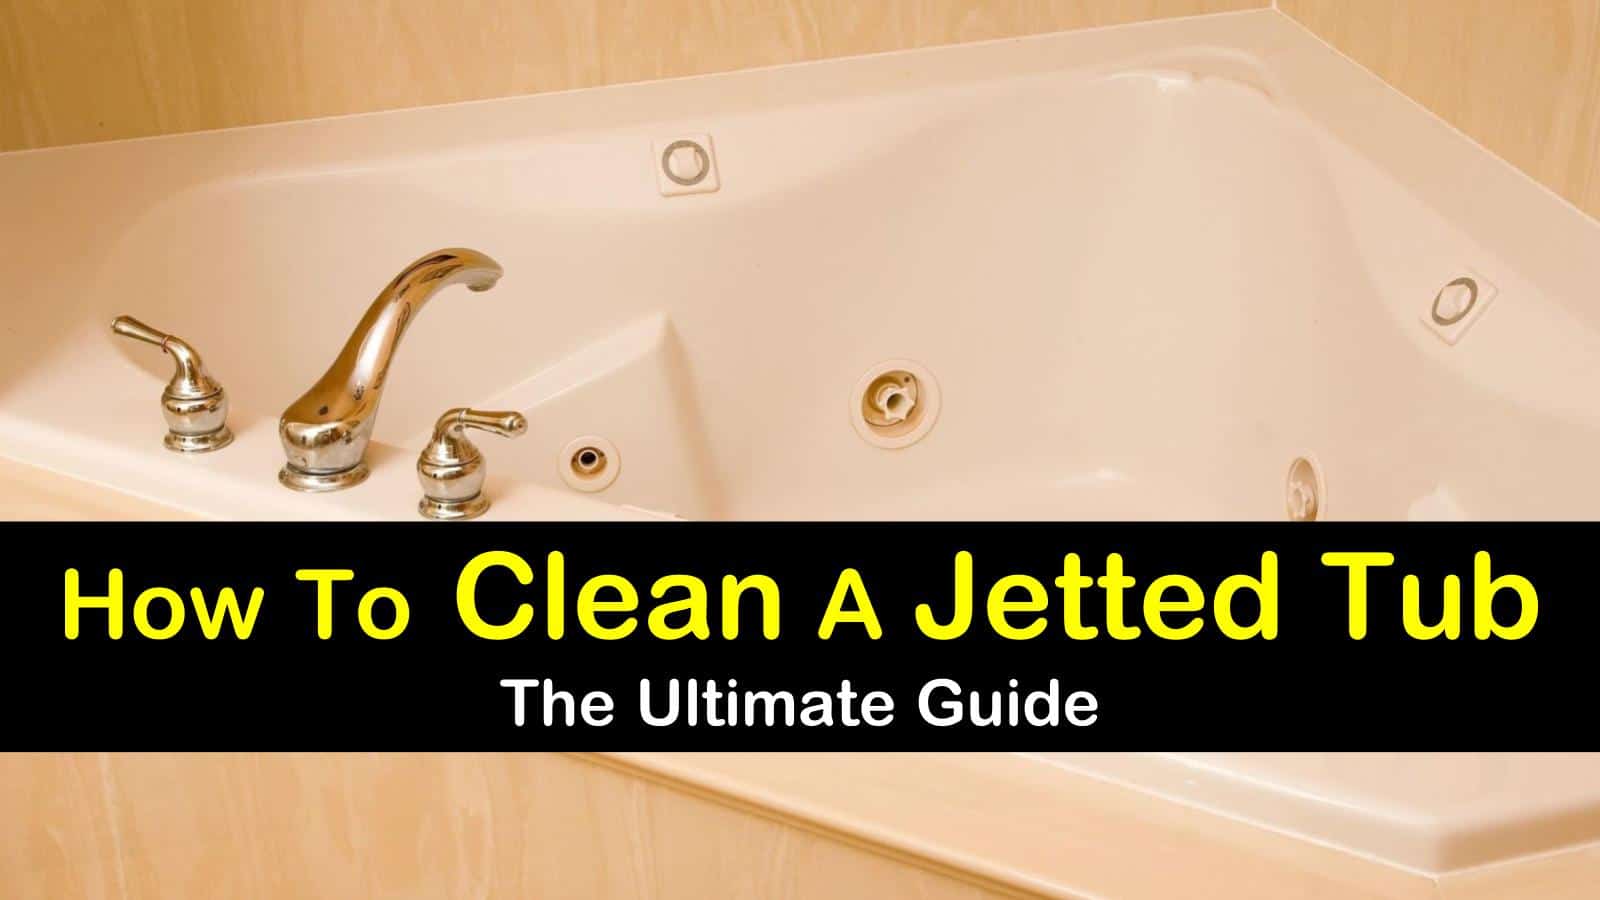 3 Smart Simple Ways To Clean A Jetted Tub, How To Use Bathtub Jets